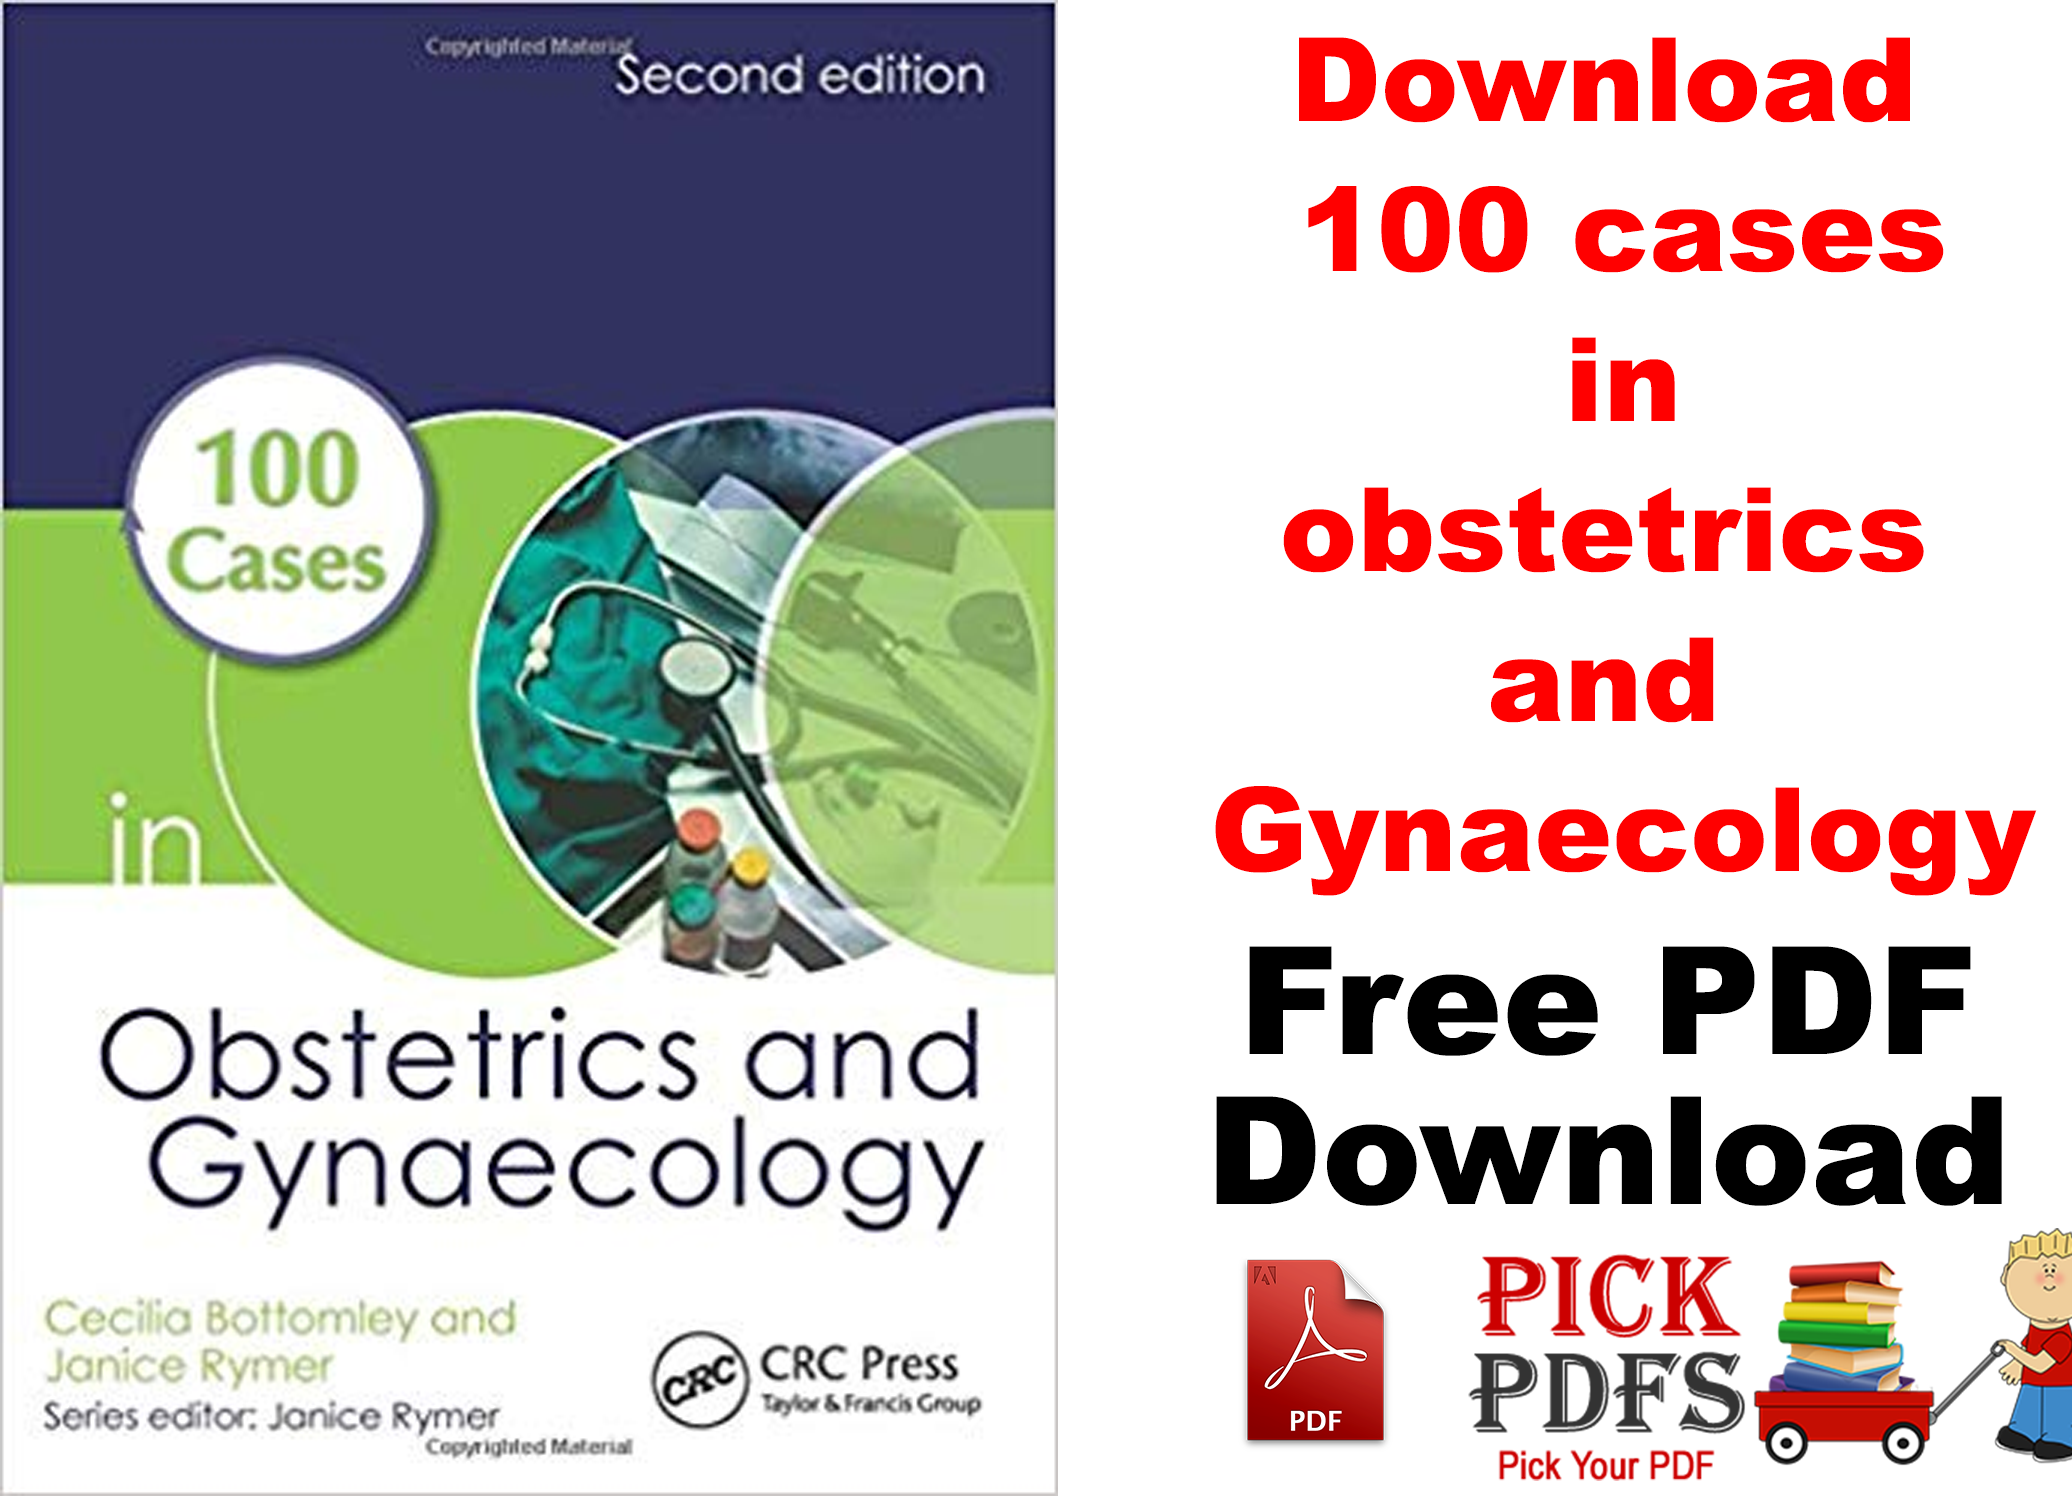 https://pickpdfs.com/download-obstetrics-and-gynecology-at-a-glance-pdf-free/